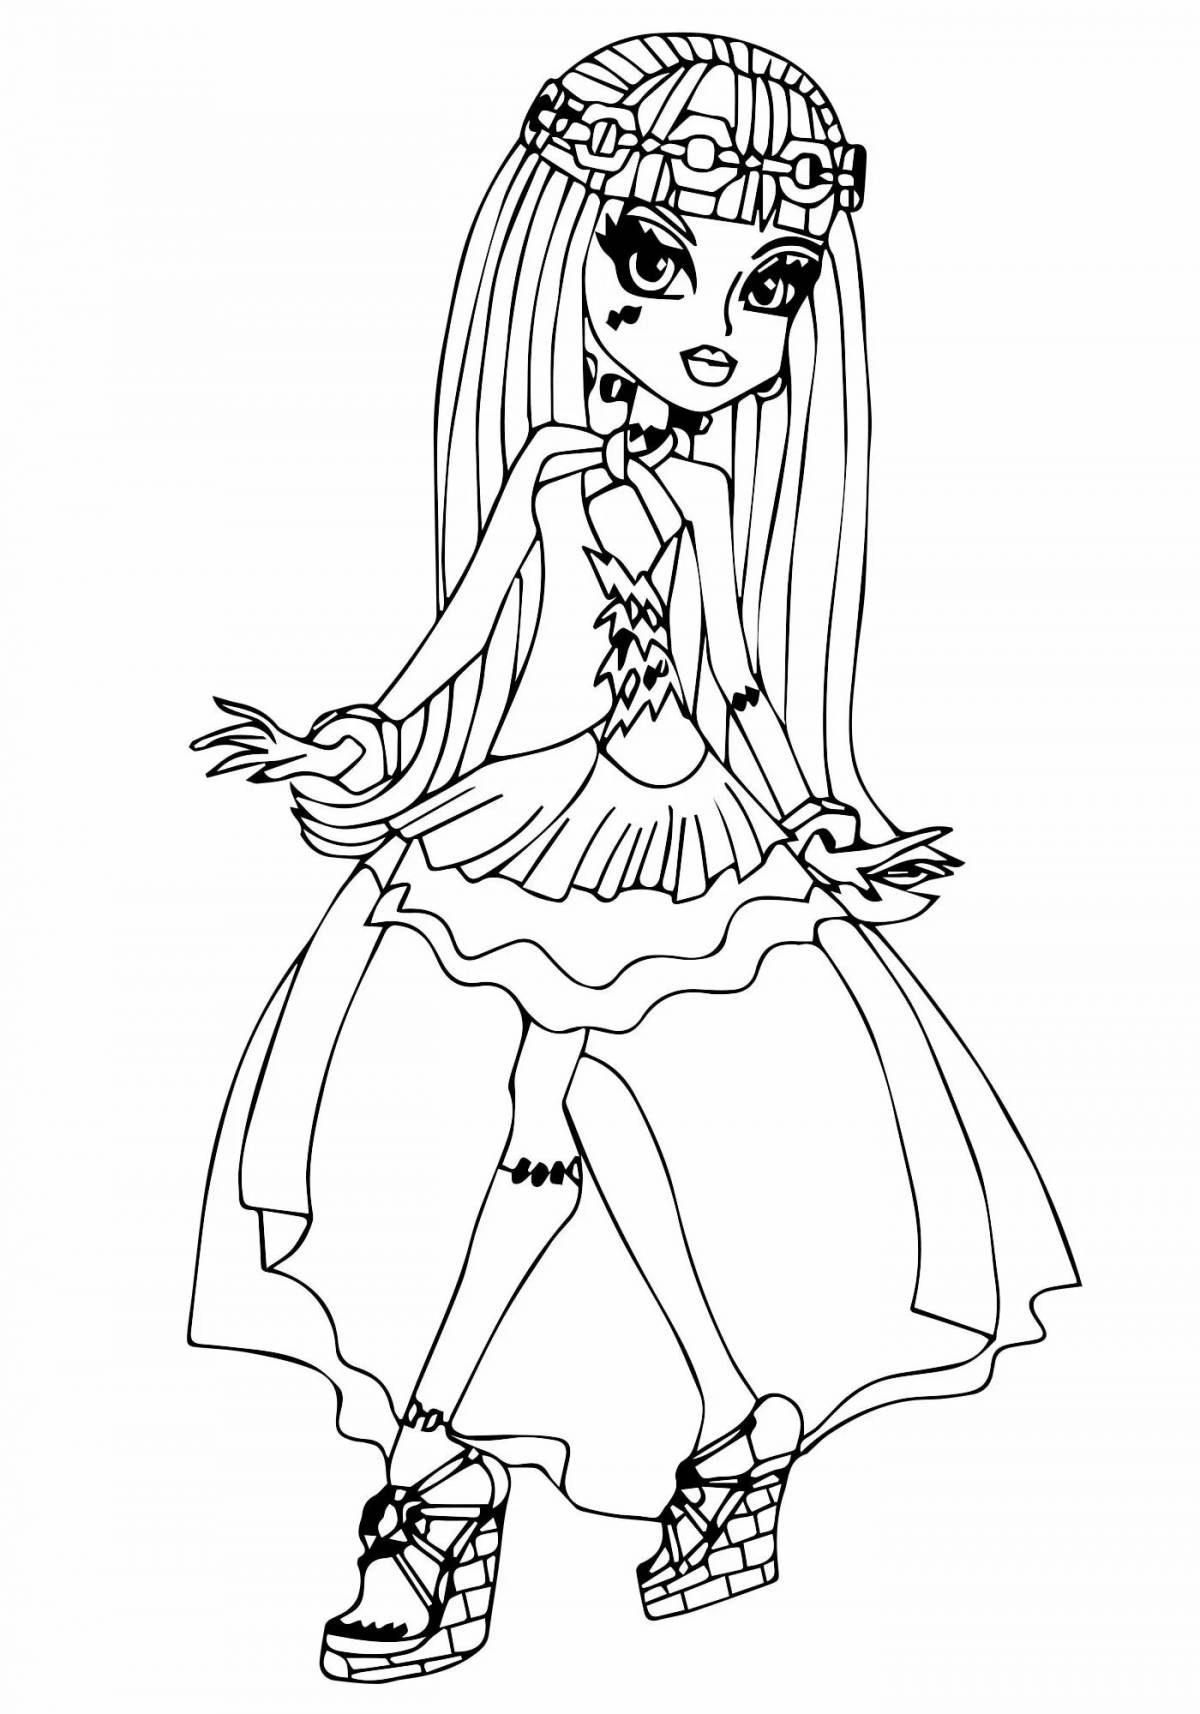 Serene coloring page monster high for girls